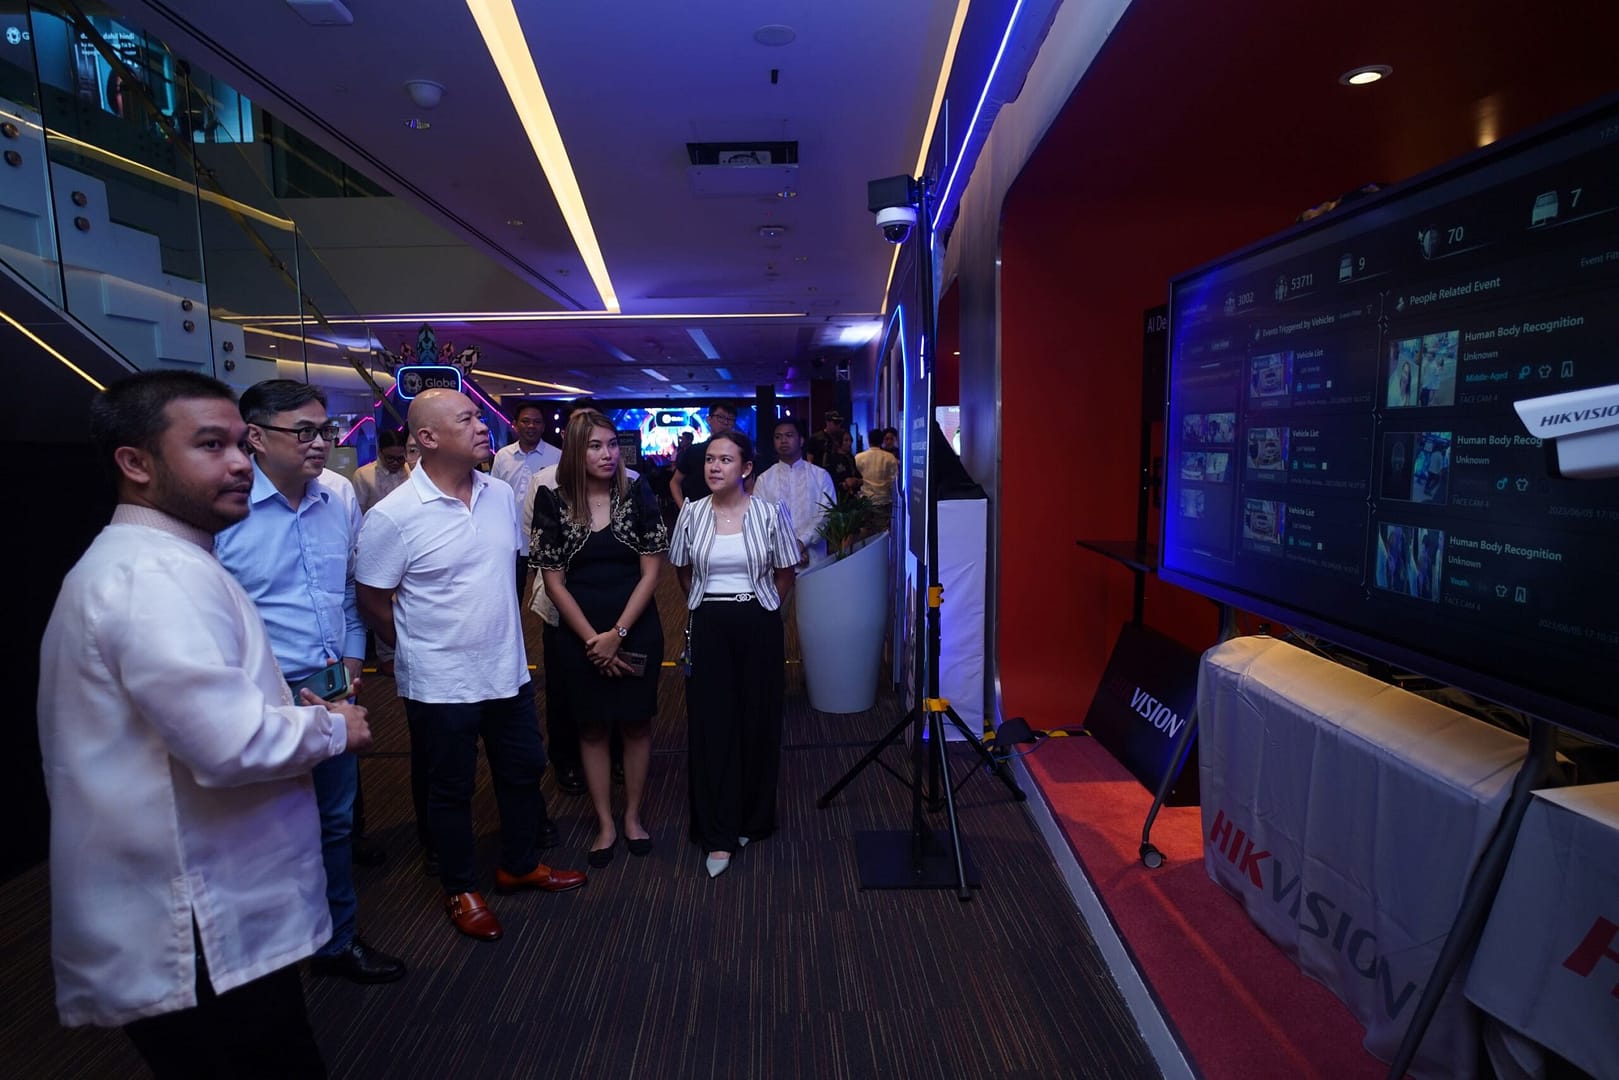 Ernest Cu, Globe Group President and CEO, and Yoke Kong Seow, Globe's Chief Technical Advisor and Head of Network Technical Group, witness a live demo of the Video Surveillance & Analytics solution, one of the 5G use cases showcased at the Innovania event